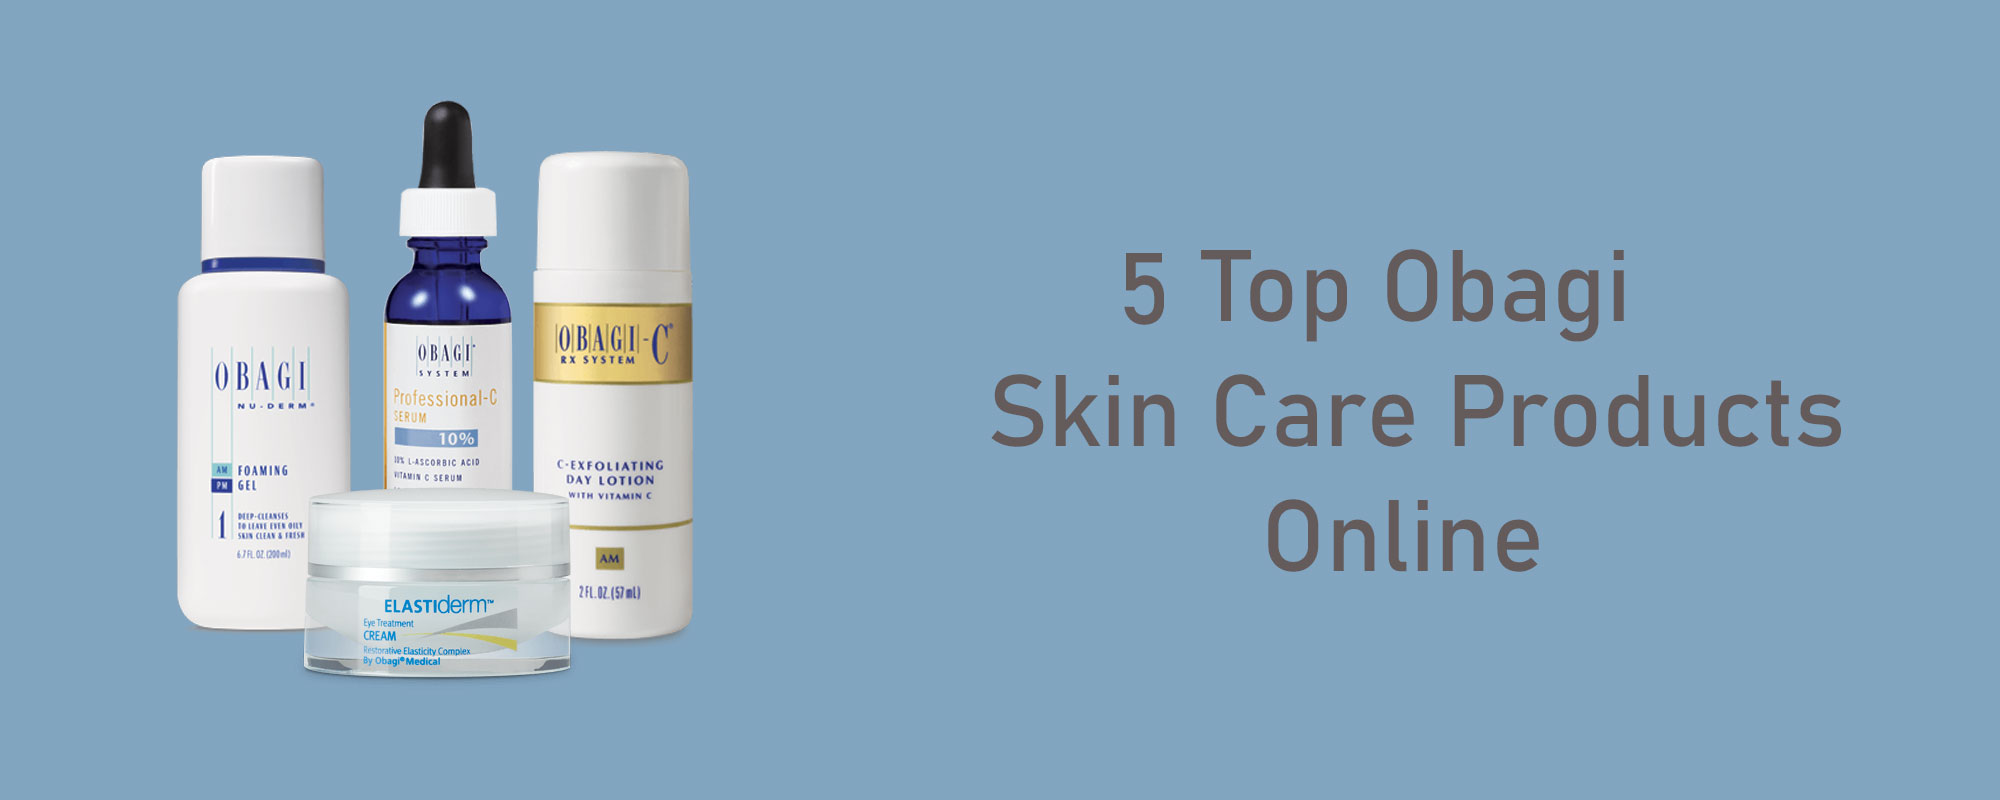 5 Top Obagi Skin Care Products Online - 1